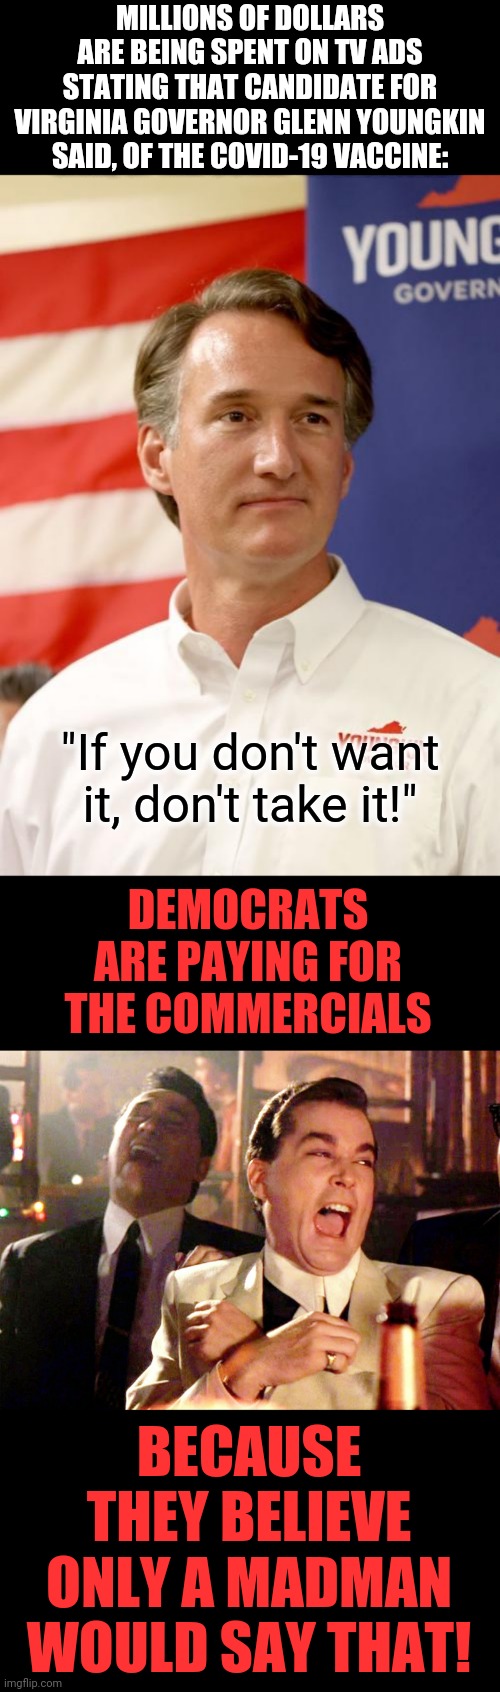 Hilarious! | MILLIONS OF DOLLARS ARE BEING SPENT ON TV ADS STATING THAT CANDIDATE FOR VIRGINIA GOVERNOR GLENN YOUNGKIN SAID, OF THE COVID-19 VACCINE:; "If you don't want it, don't take it!"; DEMOCRATS ARE PAYING FOR THE COMMERCIALS; BECAUSE THEY BELIEVE ONLY A MADMAN WOULD SAY THAT! | image tagged in memes,good fellas hilarious,virginia,glenn youngkin,tv,commercials | made w/ Imgflip meme maker